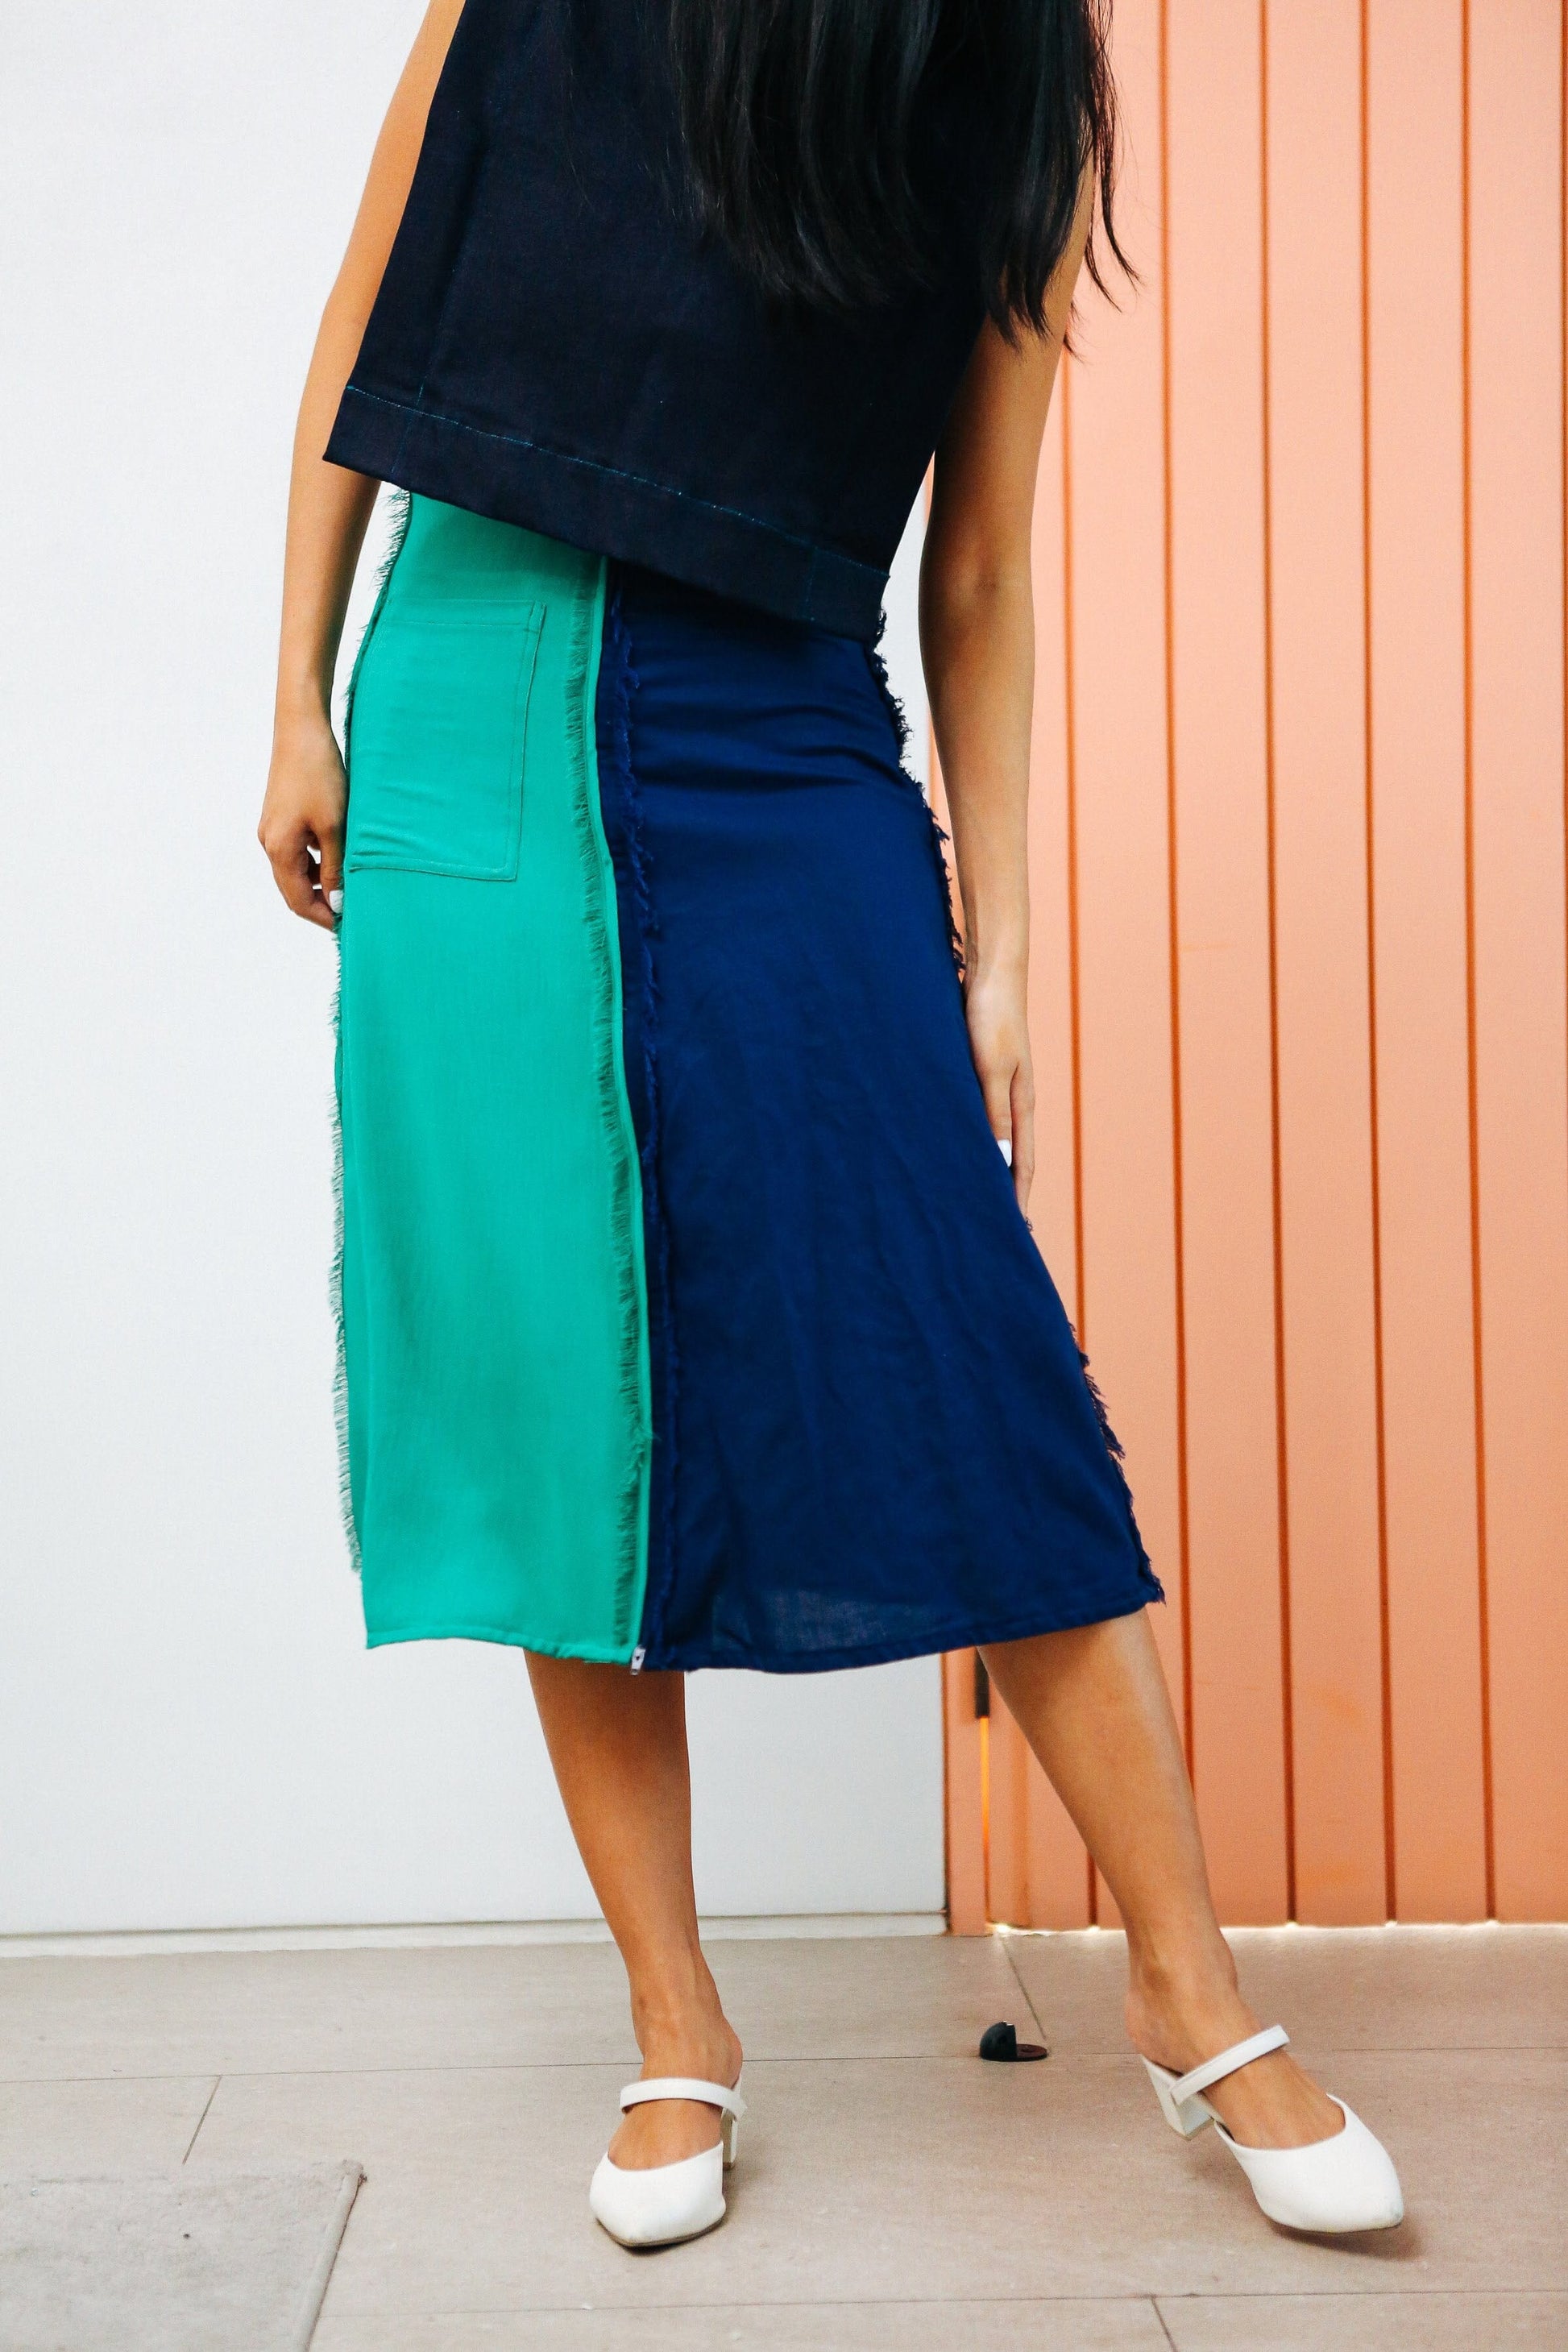 4-Way A-Line Skirt Navy & Teal Fashion Rags2Riches